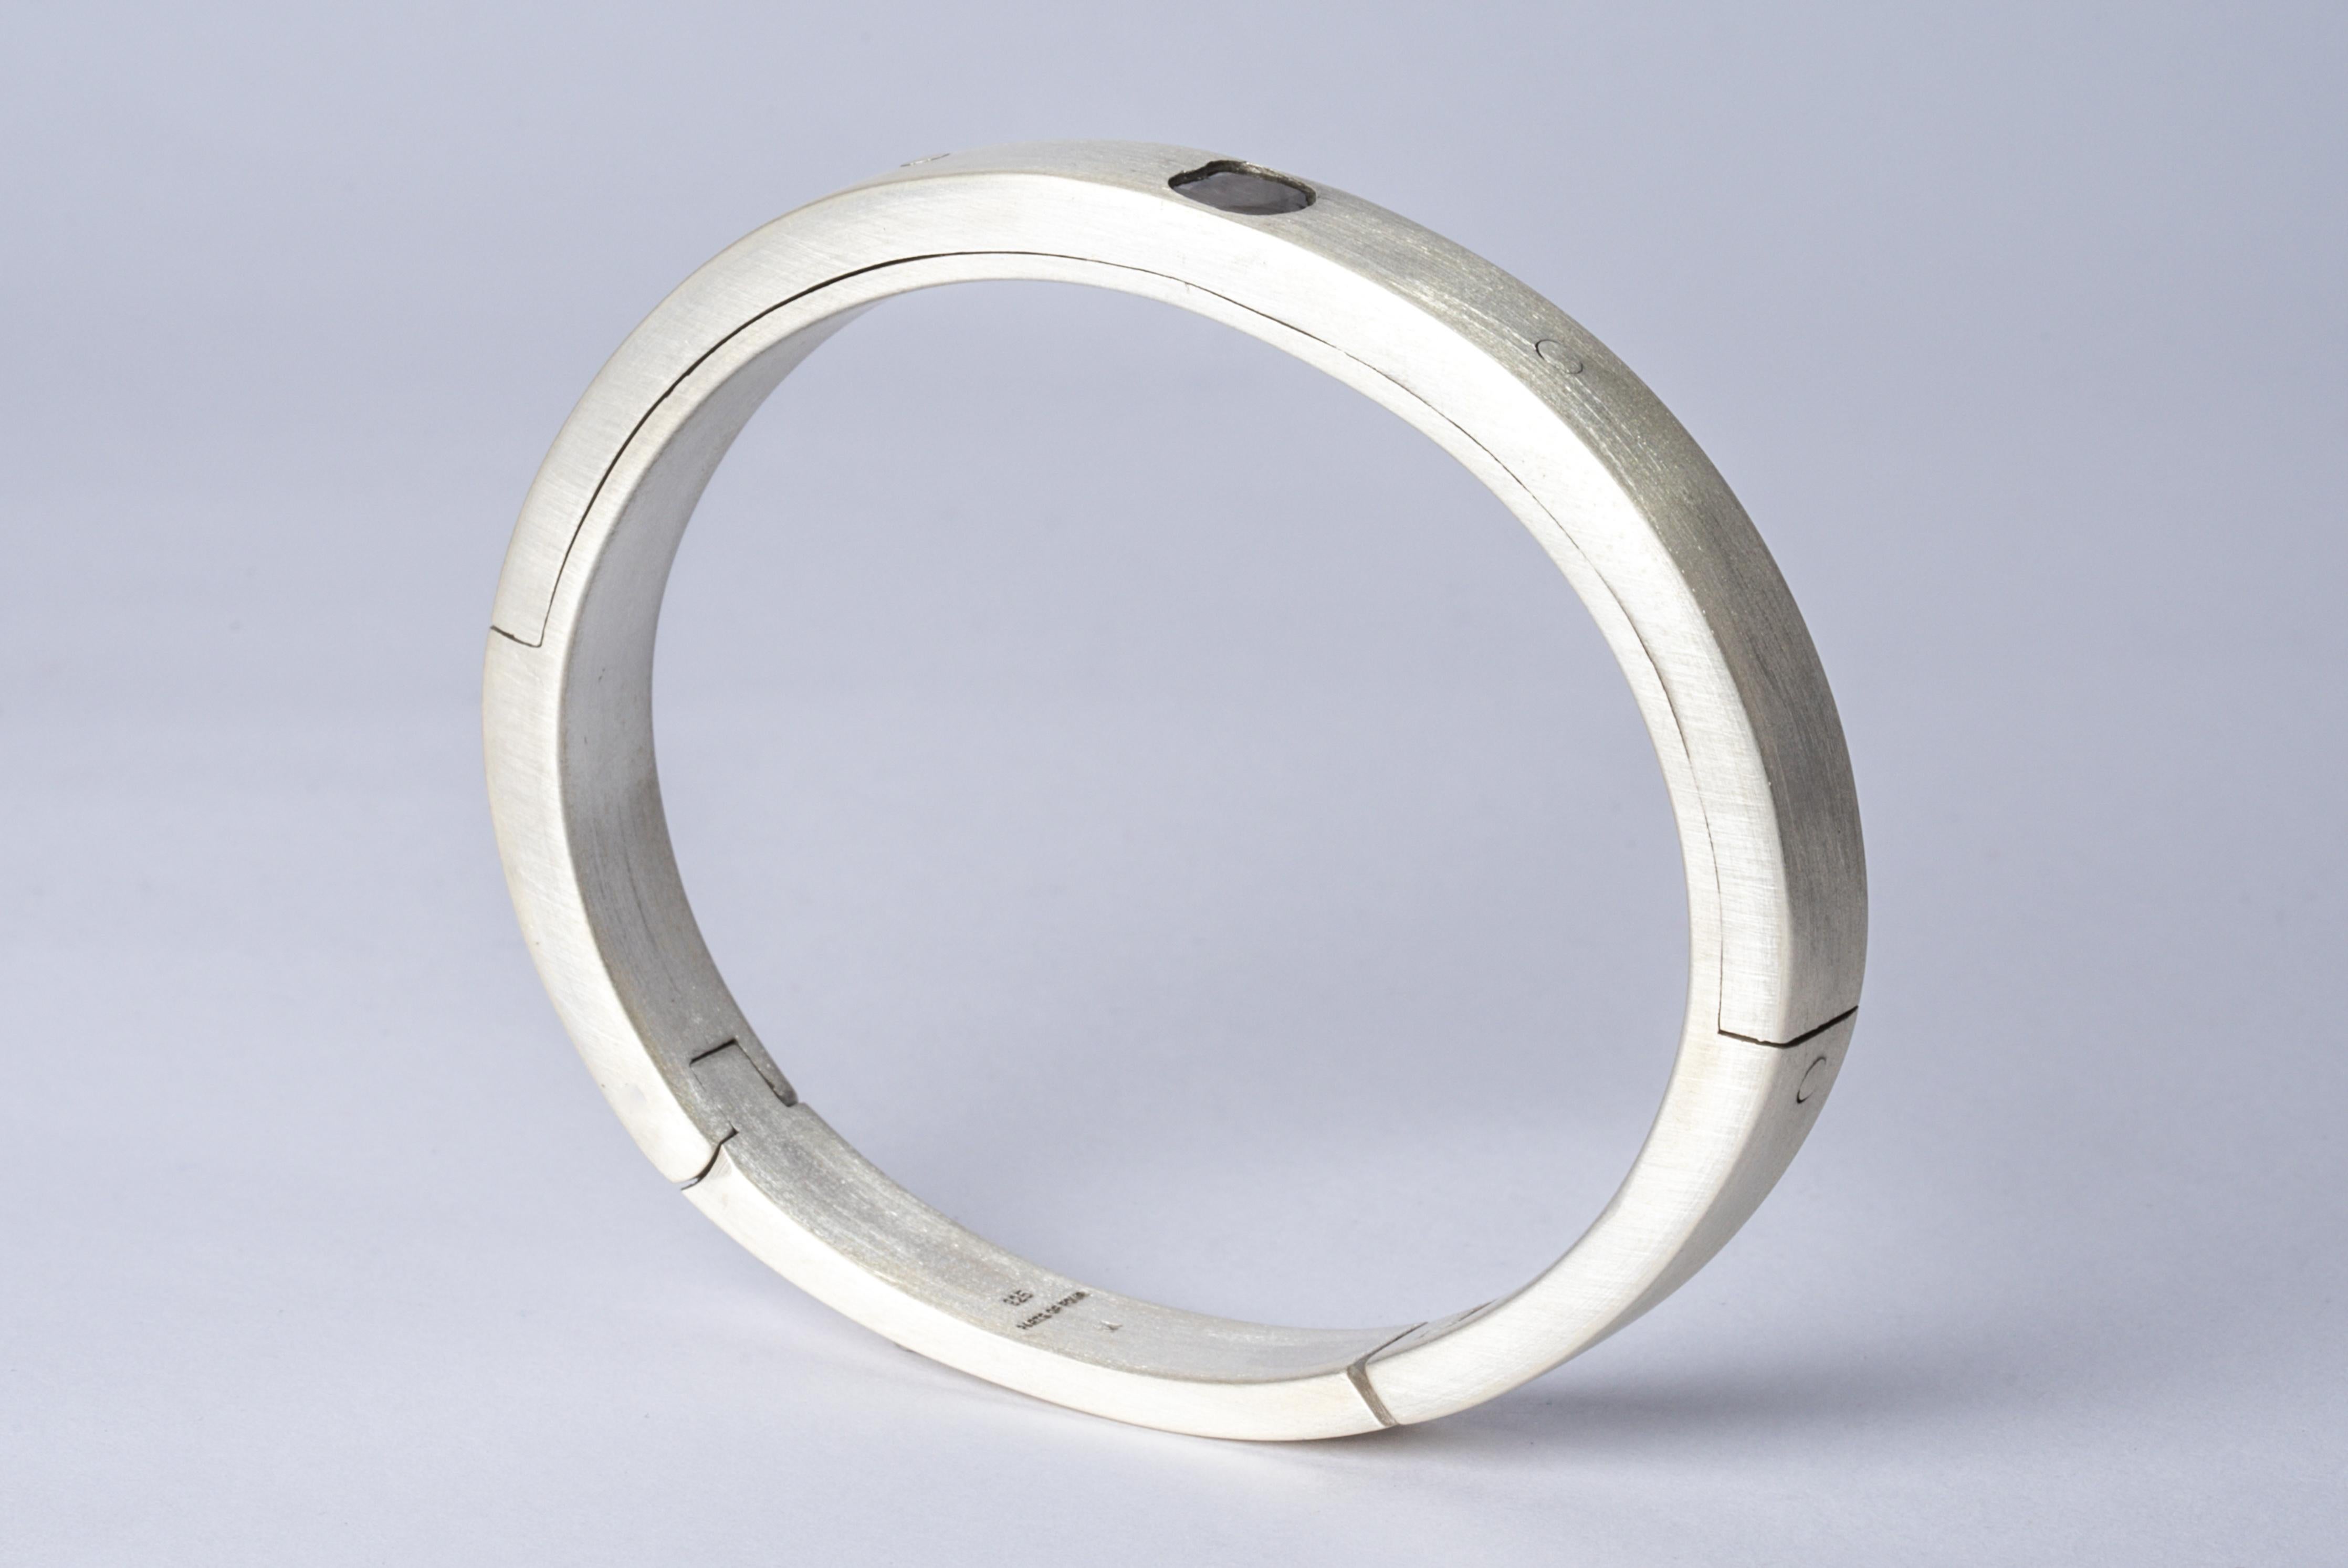 Bracelet in sterling silver and a slab of rough diamond. This slab is removed from a larger chunk of diamond. The Sistema series expresses the core principle of P/4 which is modularity. The 